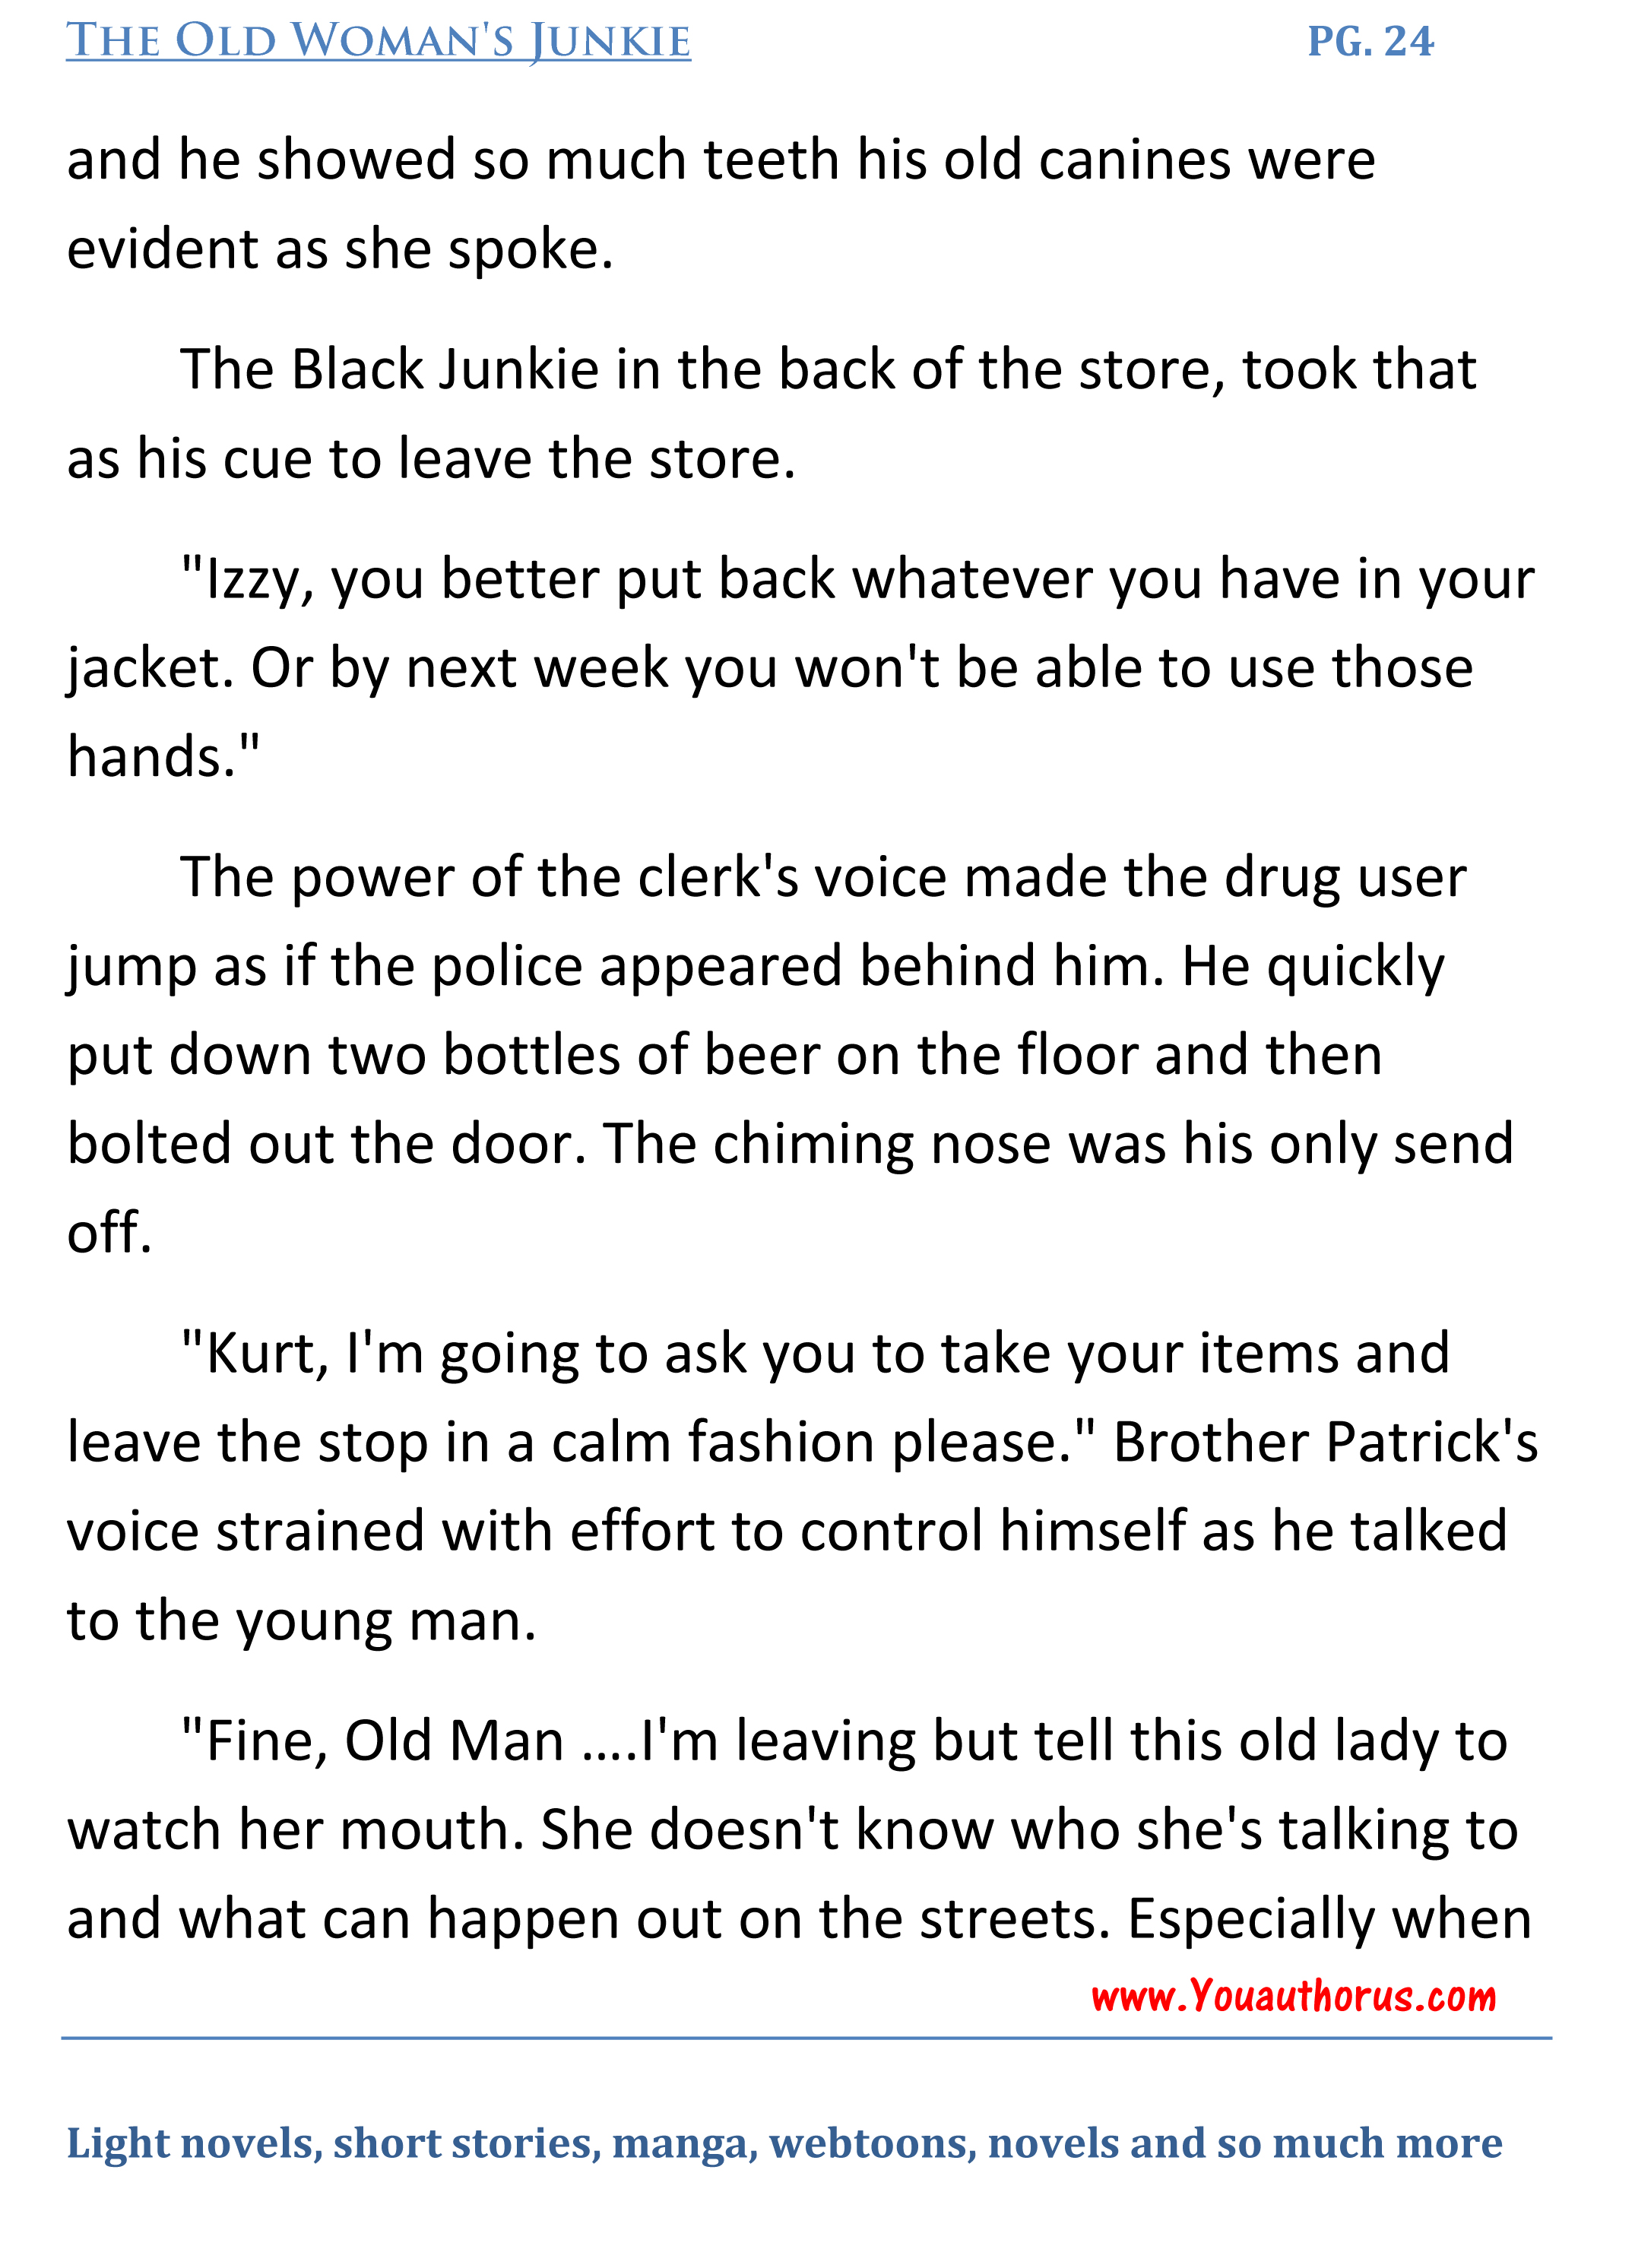 The Old Woman's Junkie(publishing 1)-24 copy